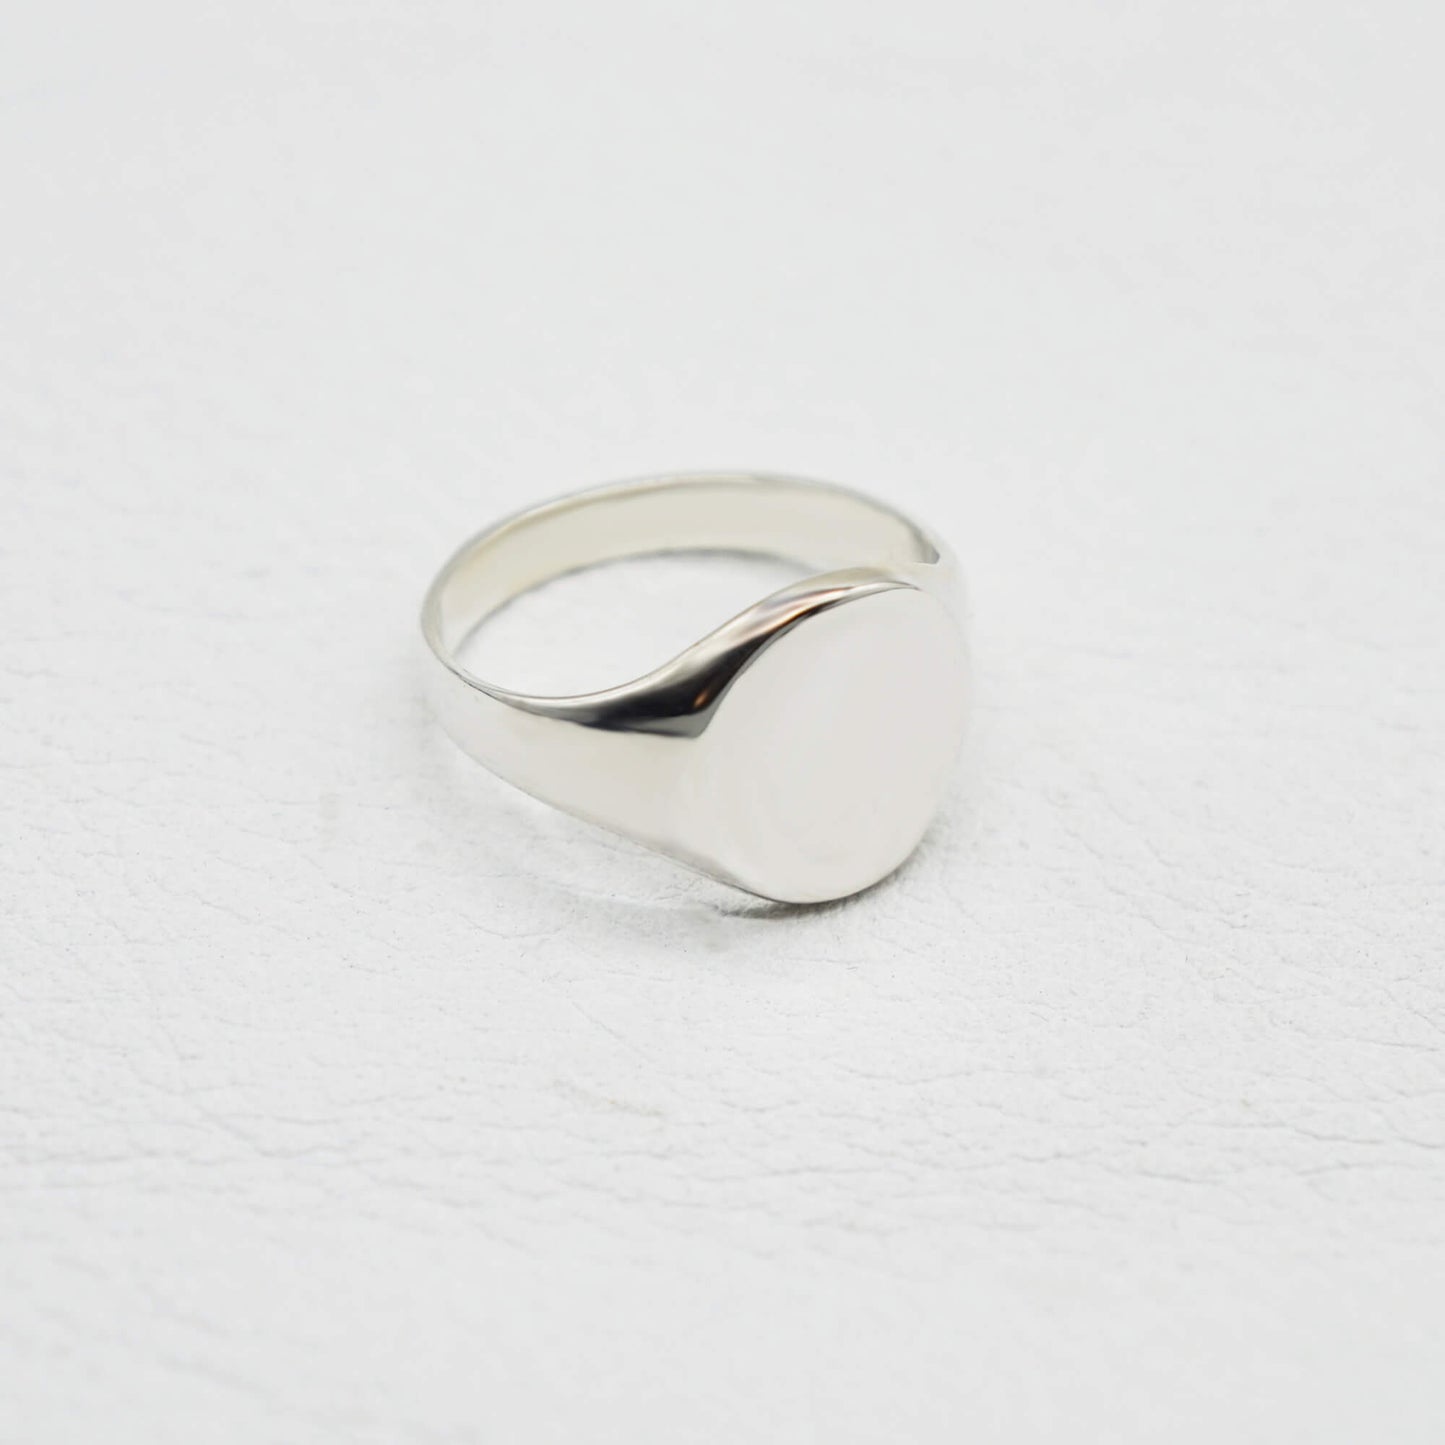 STERLING SILVER OVAL SIGNET RING